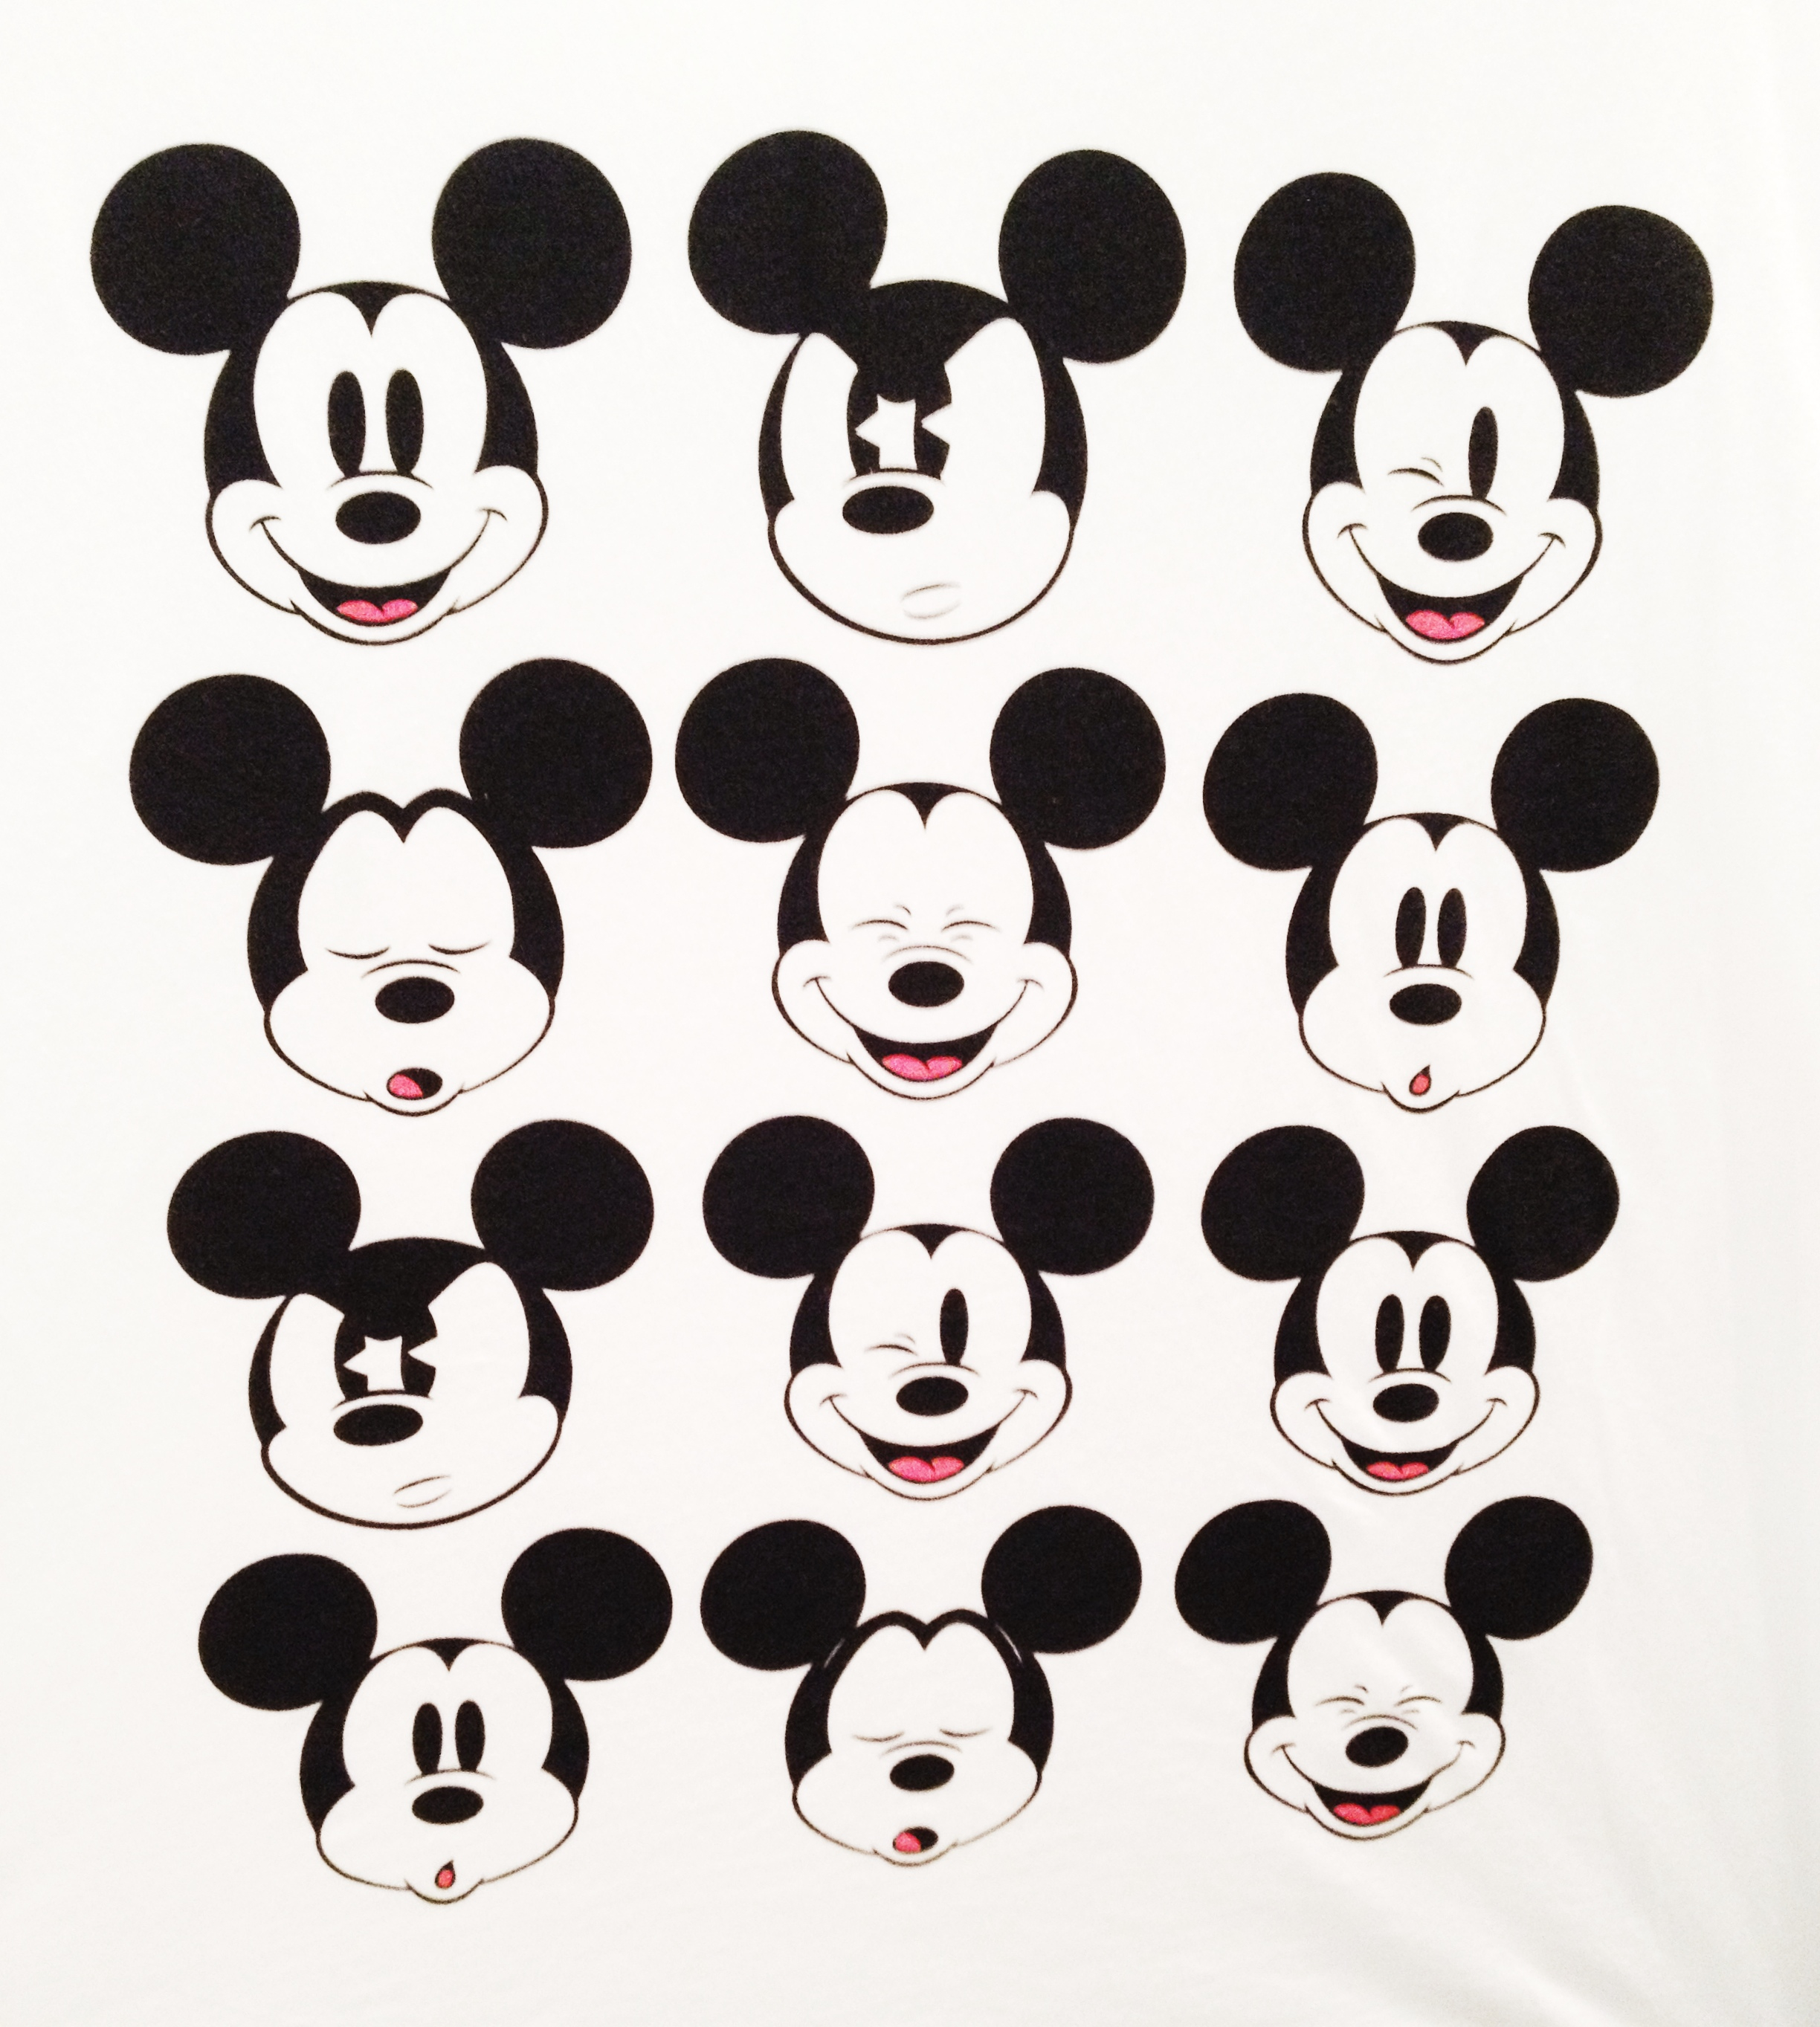 Mickey M mostly white & black on Pinterest | Mickey Mouse, Mice ...